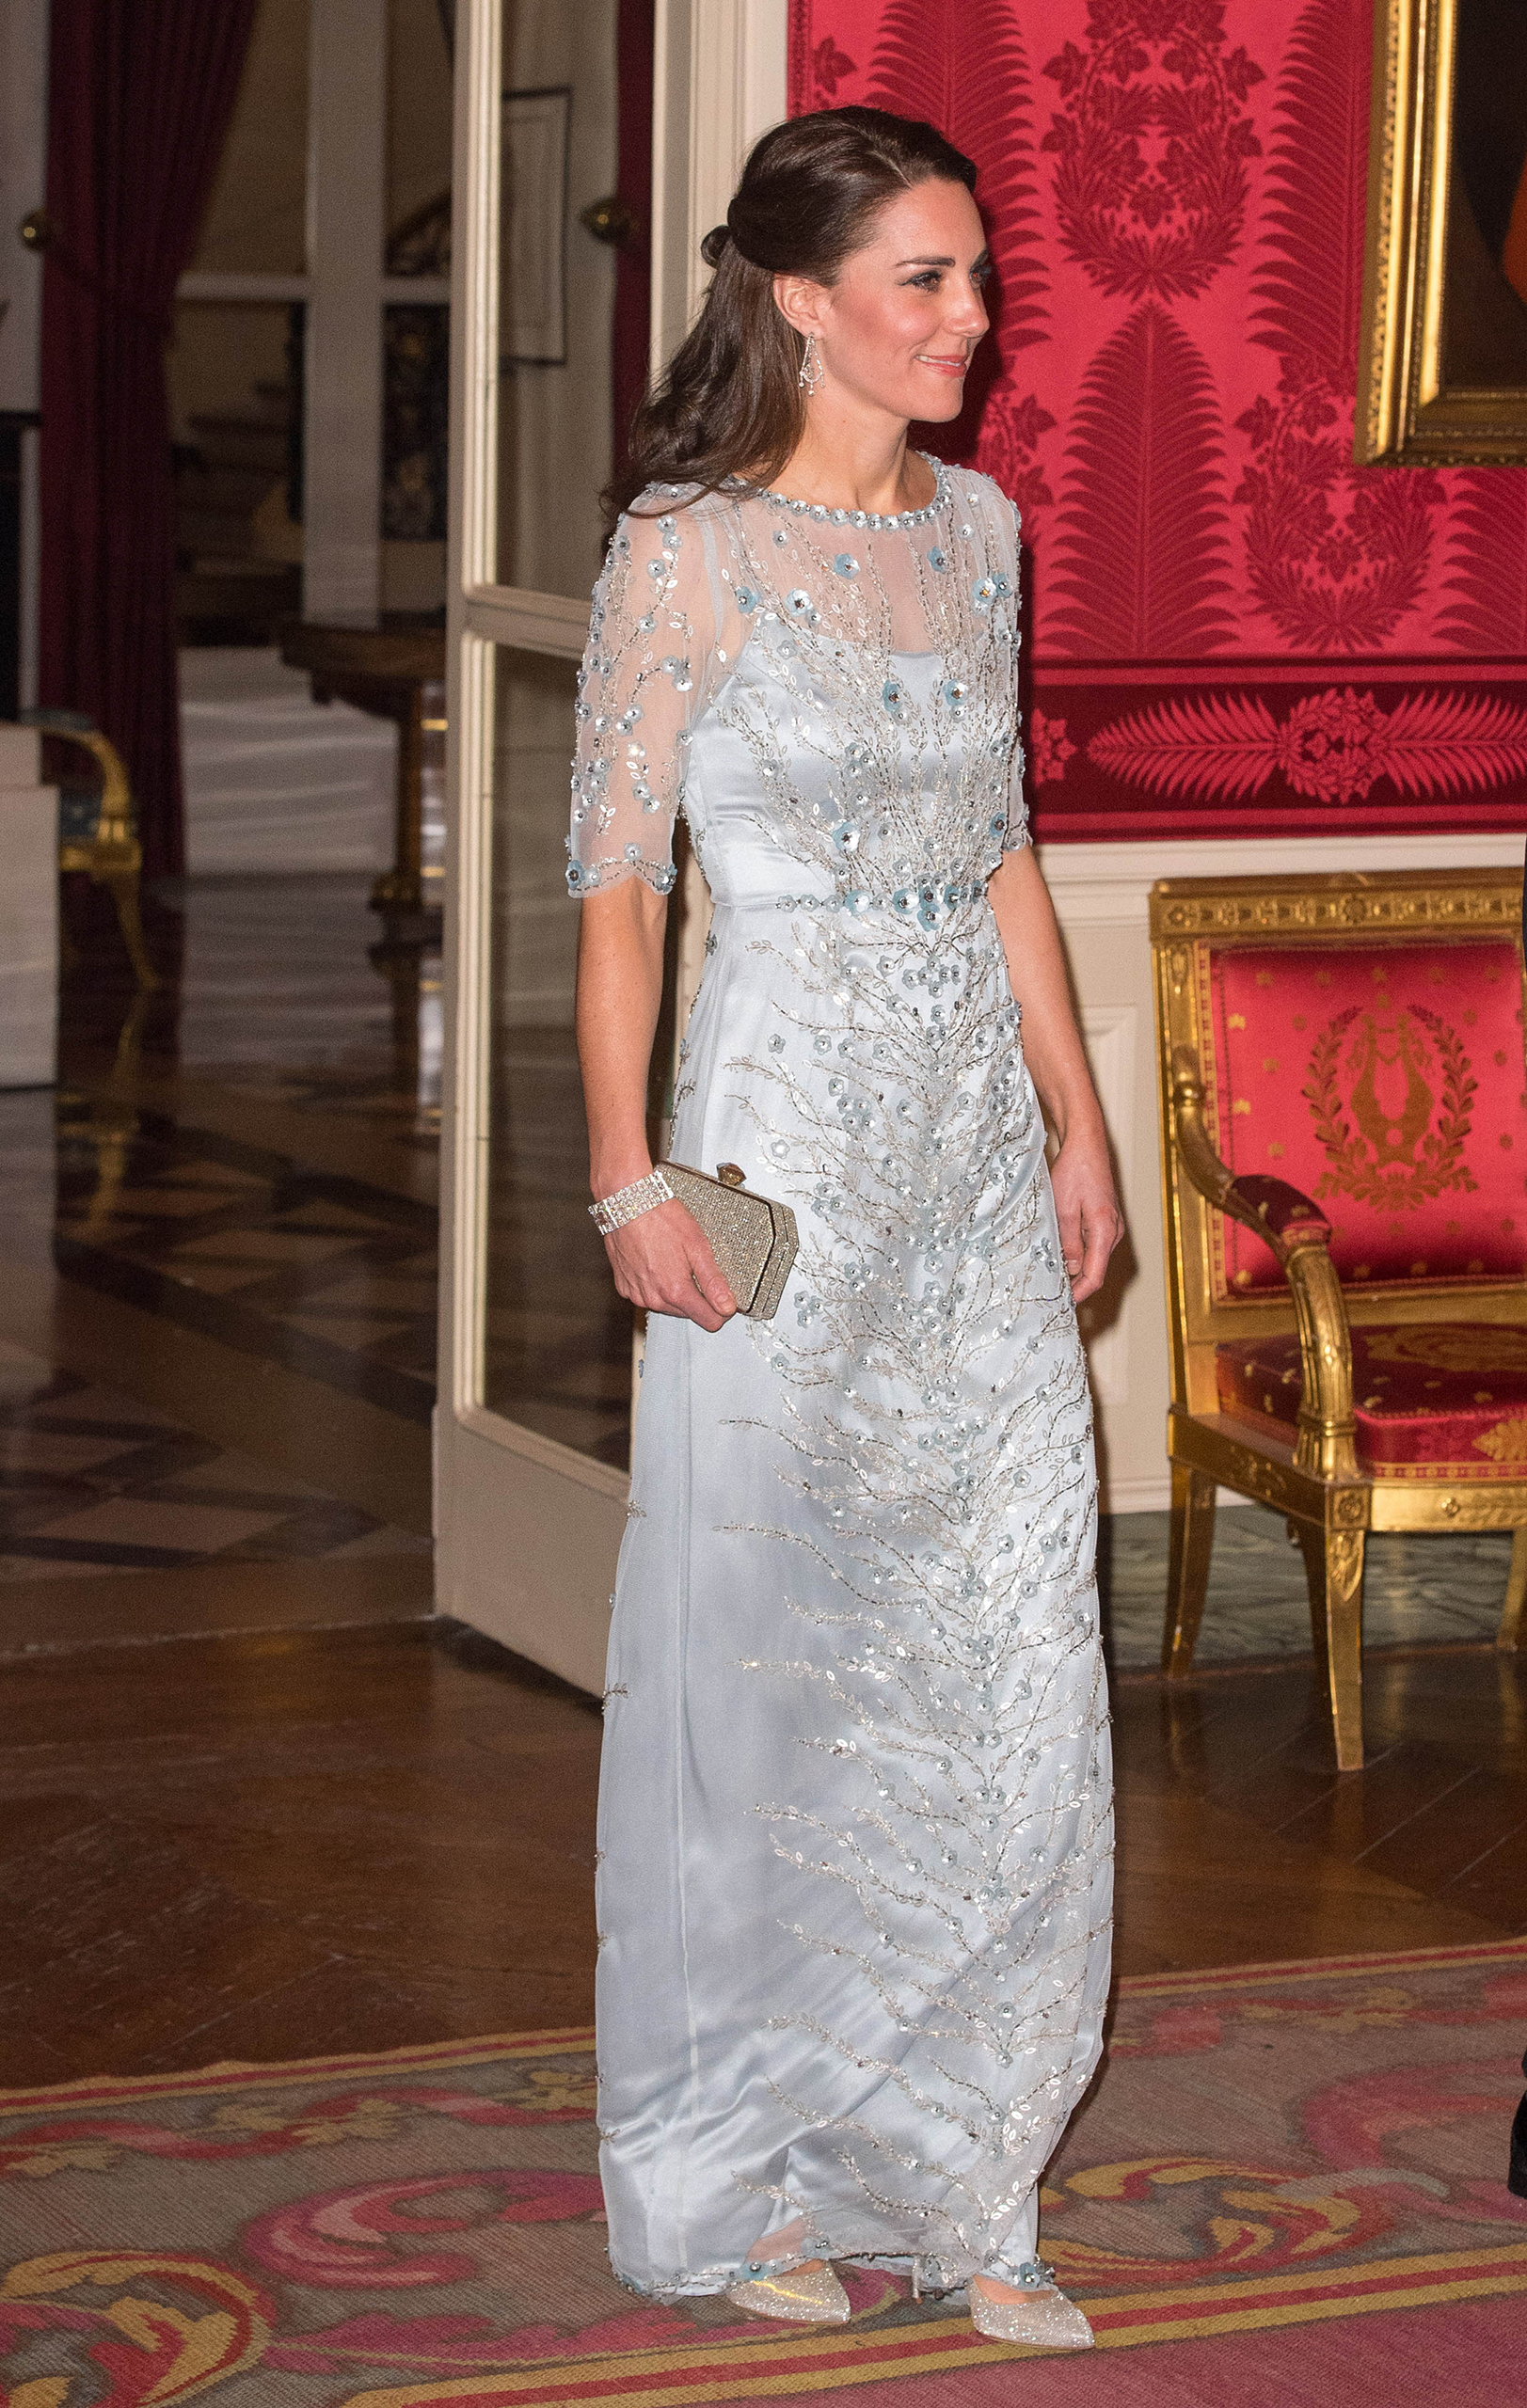 Catherine, Duchess of Cambridge, attends a dinner hosted by Her Majesty's Ambassador to France, Edward Llewellyn, at the British Embassy in Paris during a two-day visit on March 17, 2017.